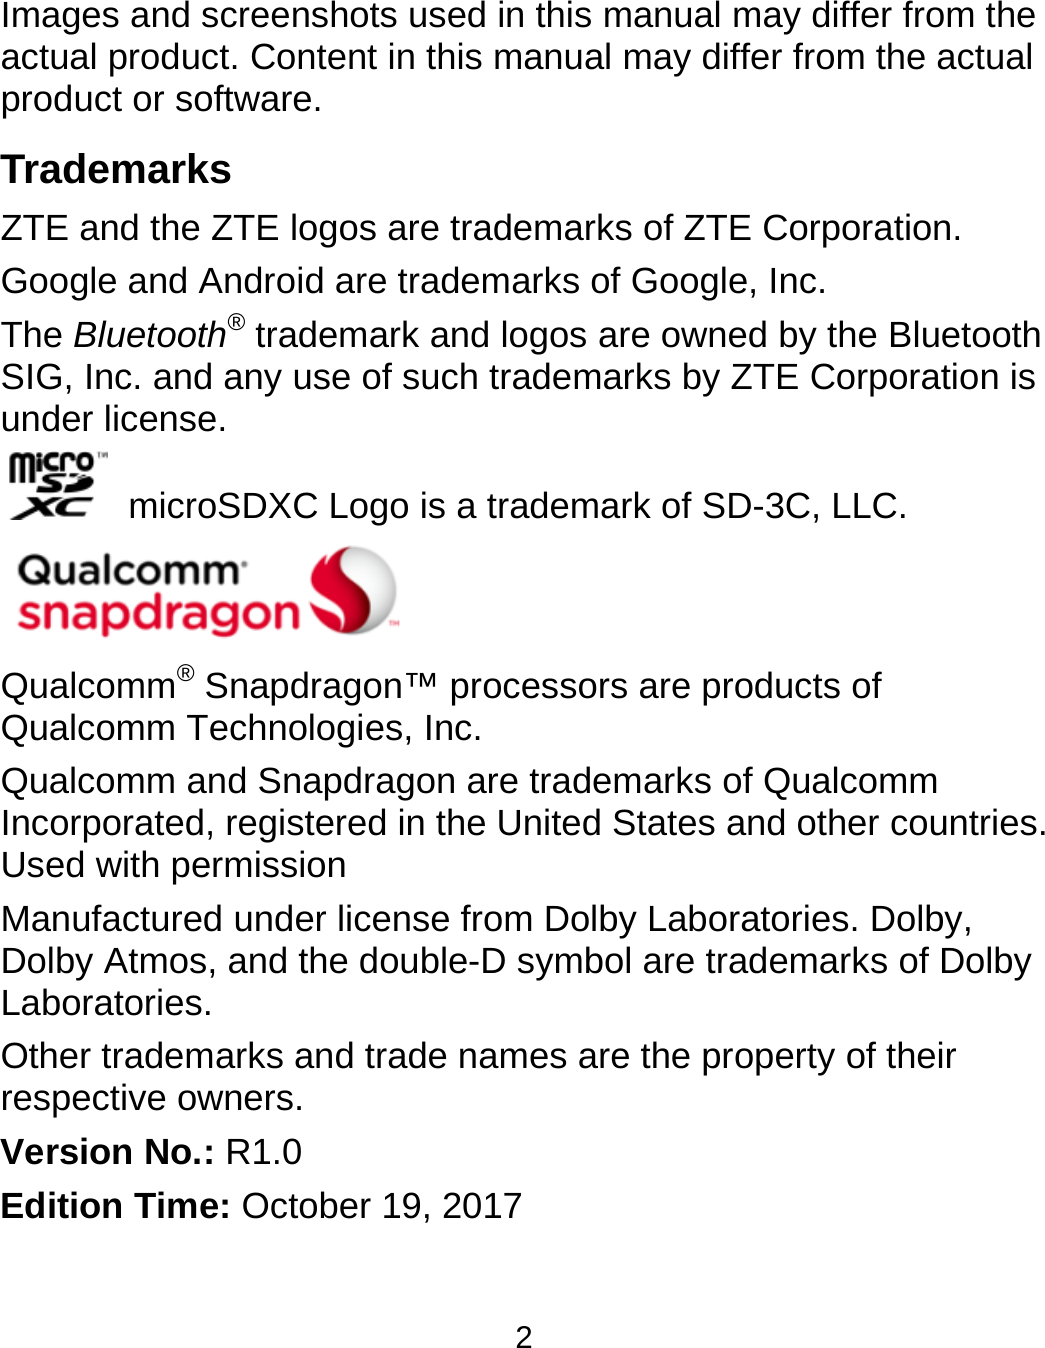  2 Images and screenshots used in this manual may differ from the actual product. Content in this manual may differ from the actual product or software. Trademarks ZTE and the ZTE logos are trademarks of ZTE Corporation. Google and Android are trademarks of Google, Inc.   The Bluetooth® trademark and logos are owned by the Bluetooth SIG, Inc. and any use of such trademarks by ZTE Corporation is under license.     microSDXC Logo is a trademark of SD-3C, LLC.  Qualcomm® Snapdragon™ processors are products of Qualcomm Technologies, Inc.   Qualcomm and Snapdragon are trademarks of Qualcomm Incorporated, registered in the United States and other countries. Used with permission Manufactured under license from Dolby Laboratories. Dolby, Dolby Atmos, and the double-D symbol are trademarks of Dolby Laboratories. Other trademarks and trade names are the property of their respective owners. Version No.: R1.0 Edition Time: October 19, 2017 